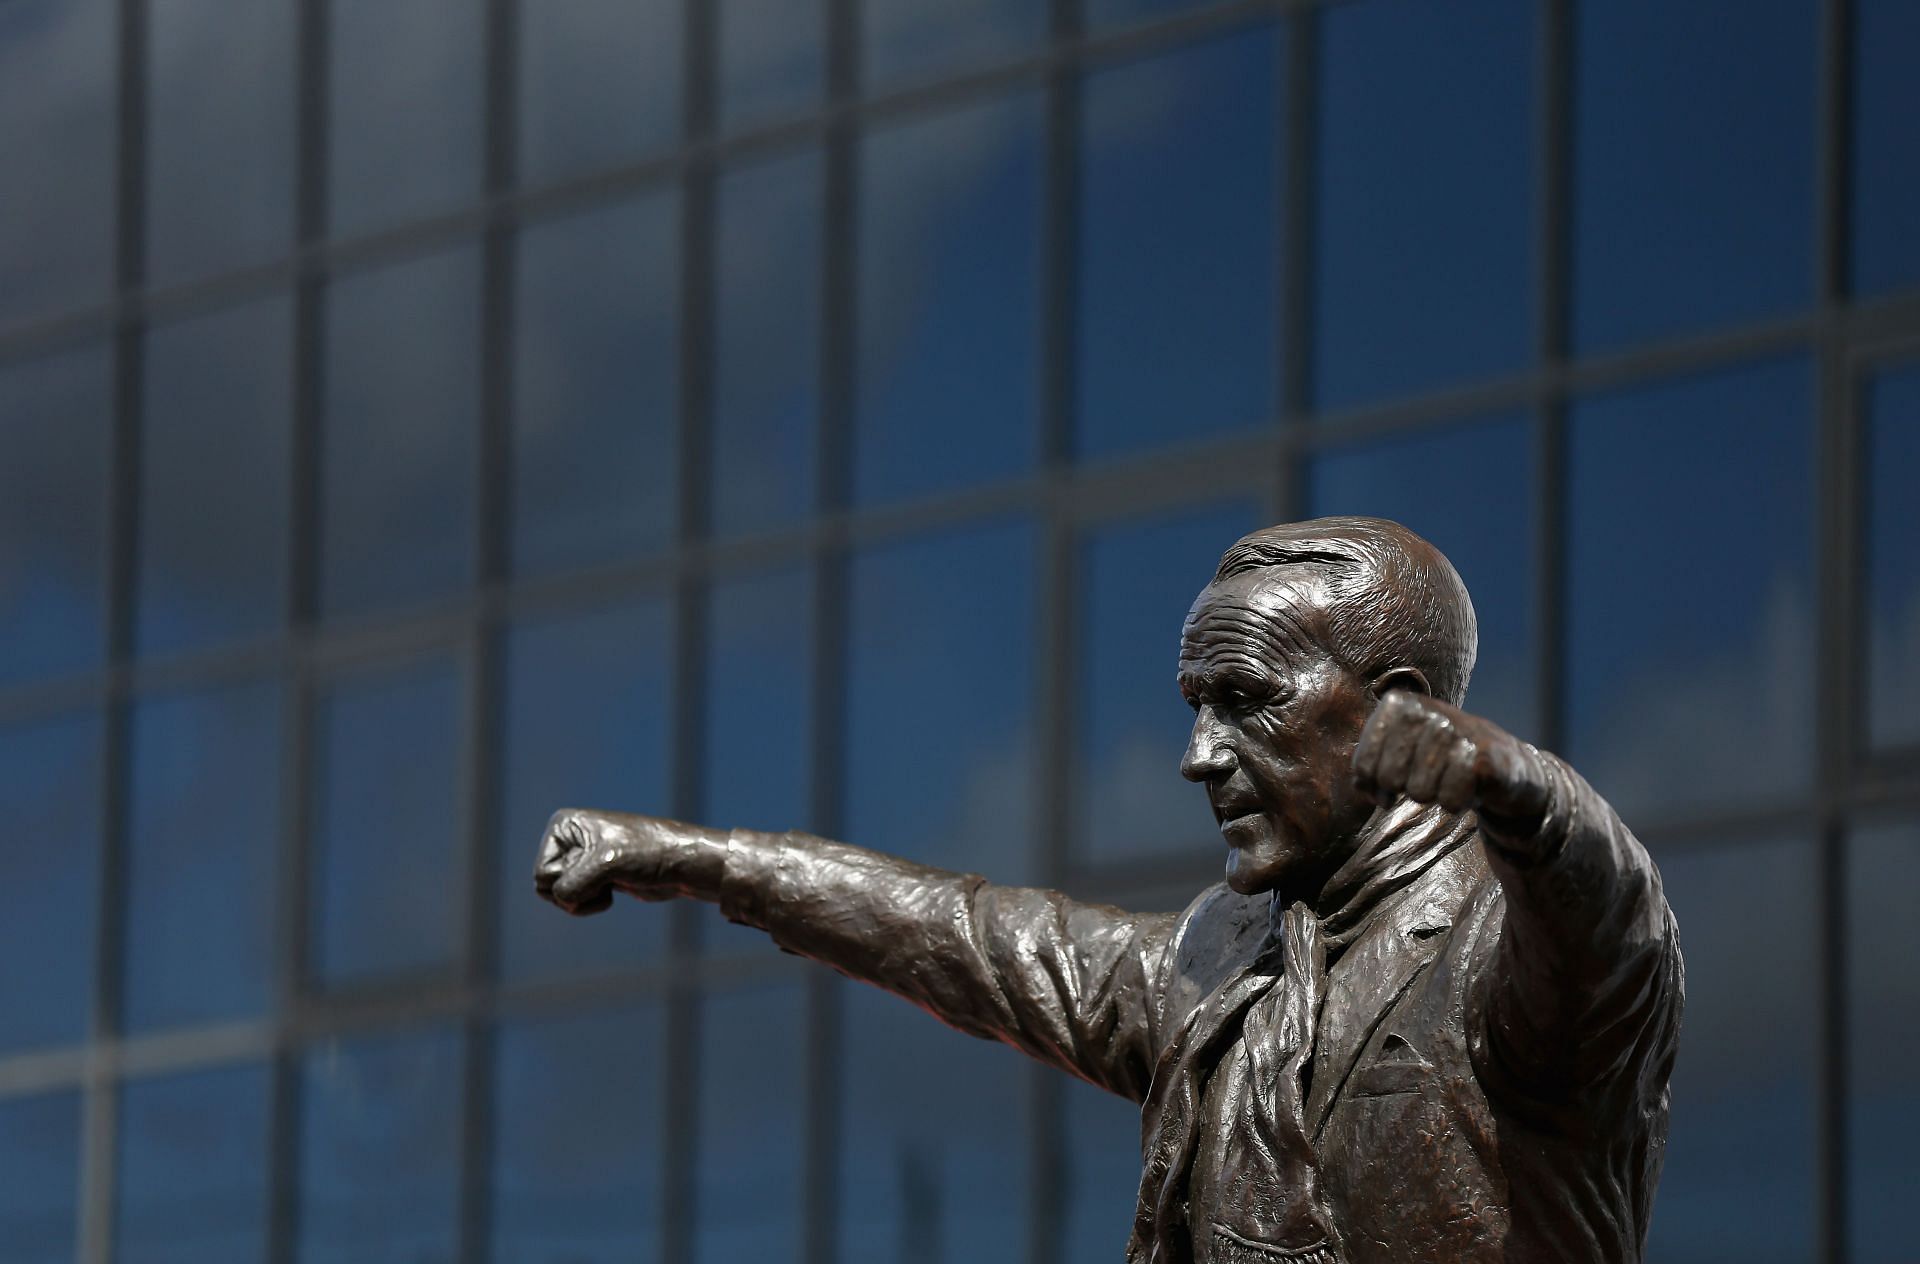 Bill Shankly has been immortalised outside Anfield.